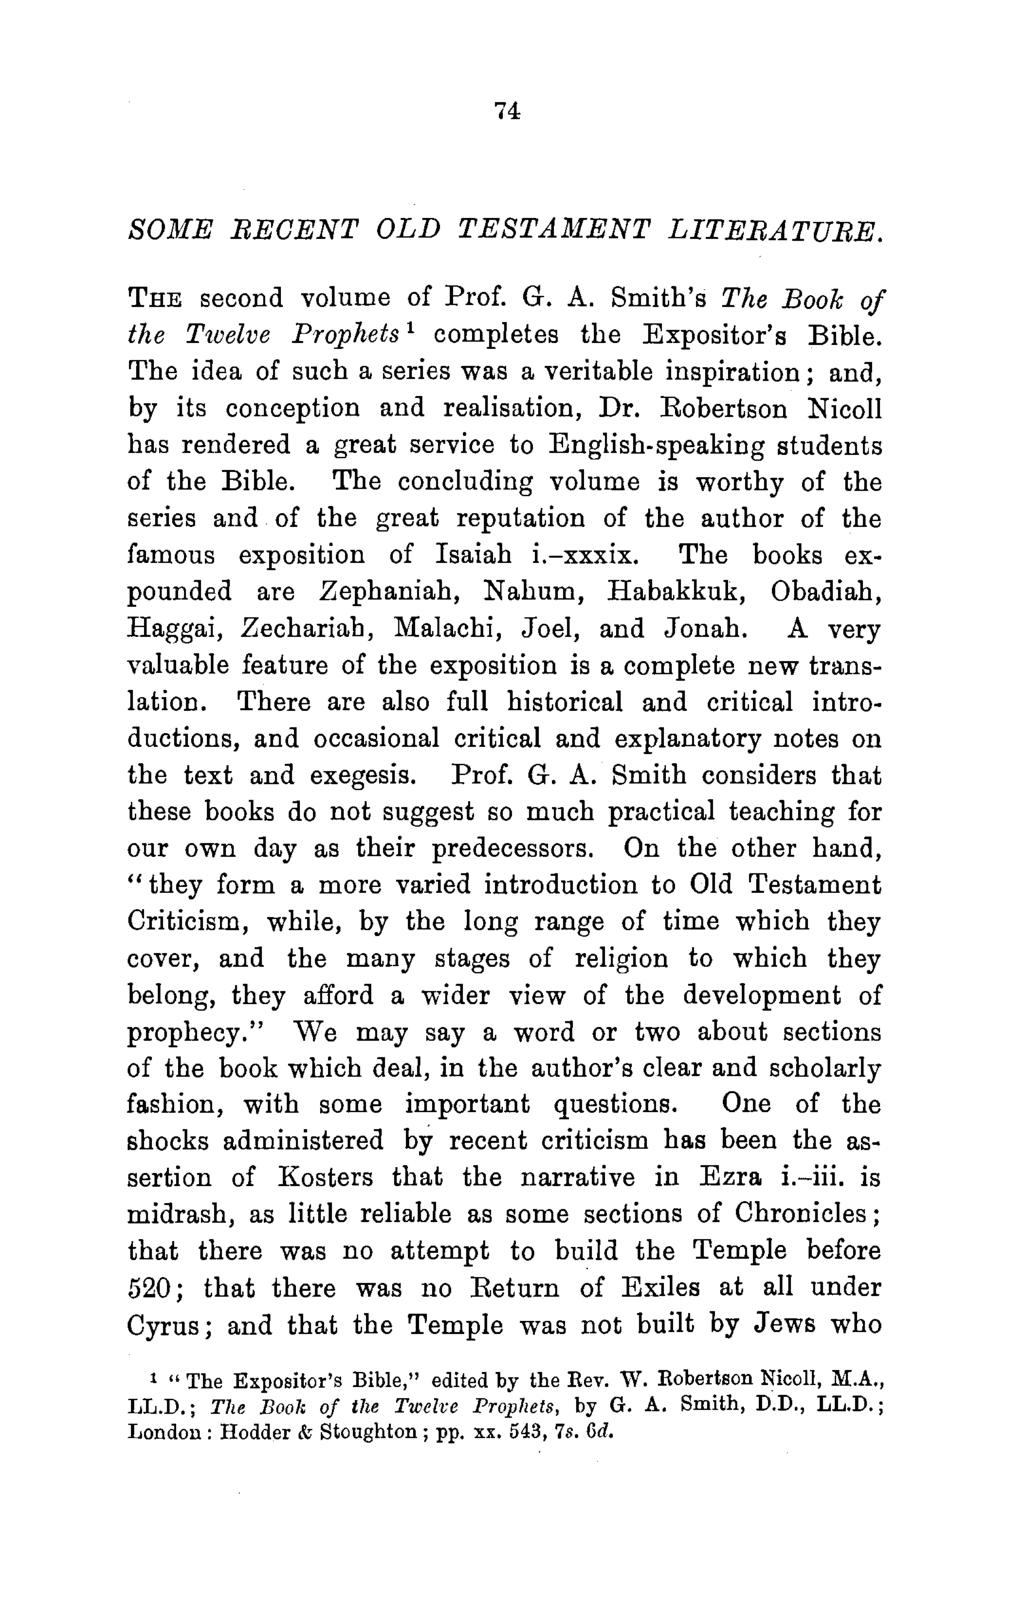 74 SOME RECENT OLD TESTAMENT LITERATURE. THE second volume of Prof. G. A. Smith's The Book of the Twelve Prophets 1 completes the Expositor's Bible.